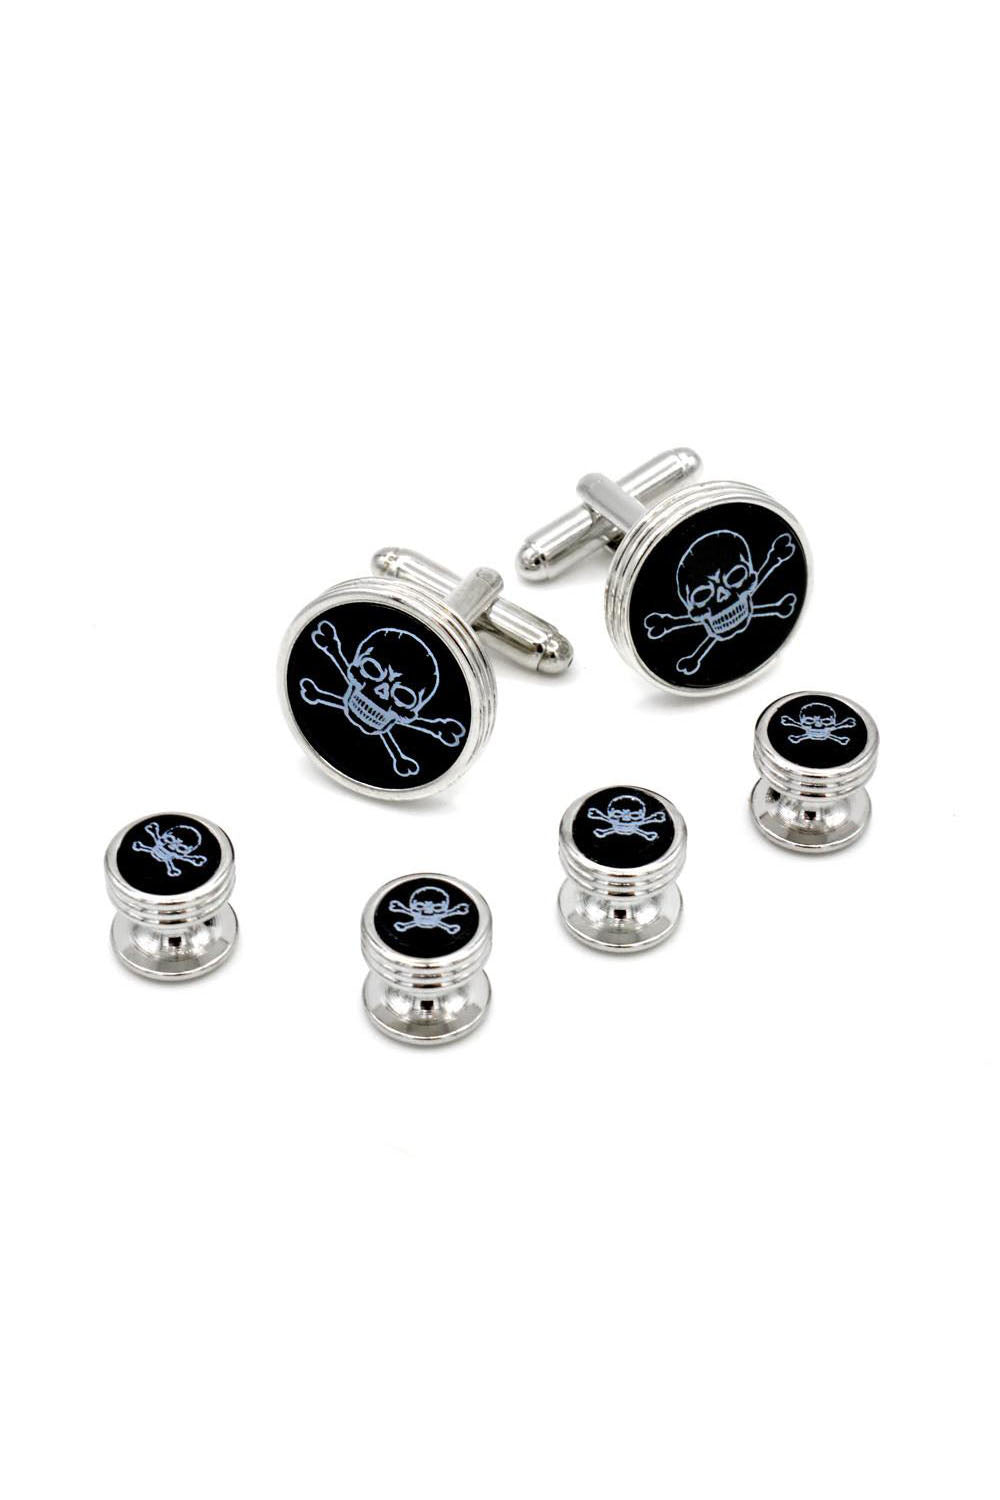 JJ Weston Engraved Skill and Crossbone Silver Studs and Cufflinks Set